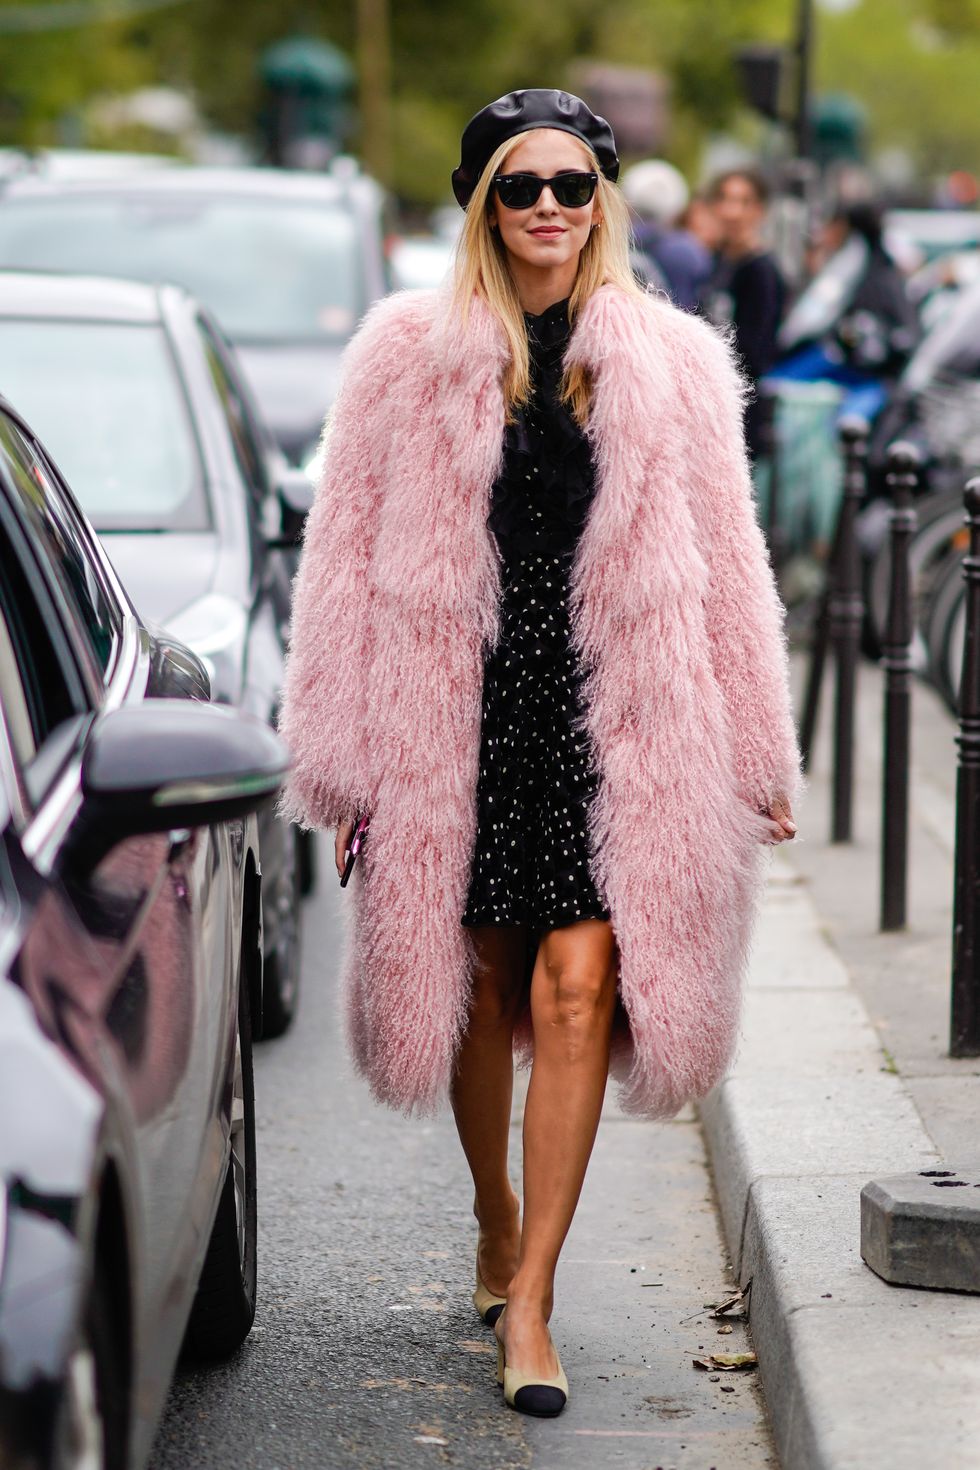 PARIS, FRANCE - OCTOBER 02:  Chiara Ferragni wears a beret hat, sunglasses, a pink fur coat, a black dress chanel slinback shoes, outside Giambattista Valli, during Paris Fashion Week Womenswear Spring/Summer 2018, on October 2, 2017 in Paris, France.  (Photo by Edward Berthelot/Getty Images)